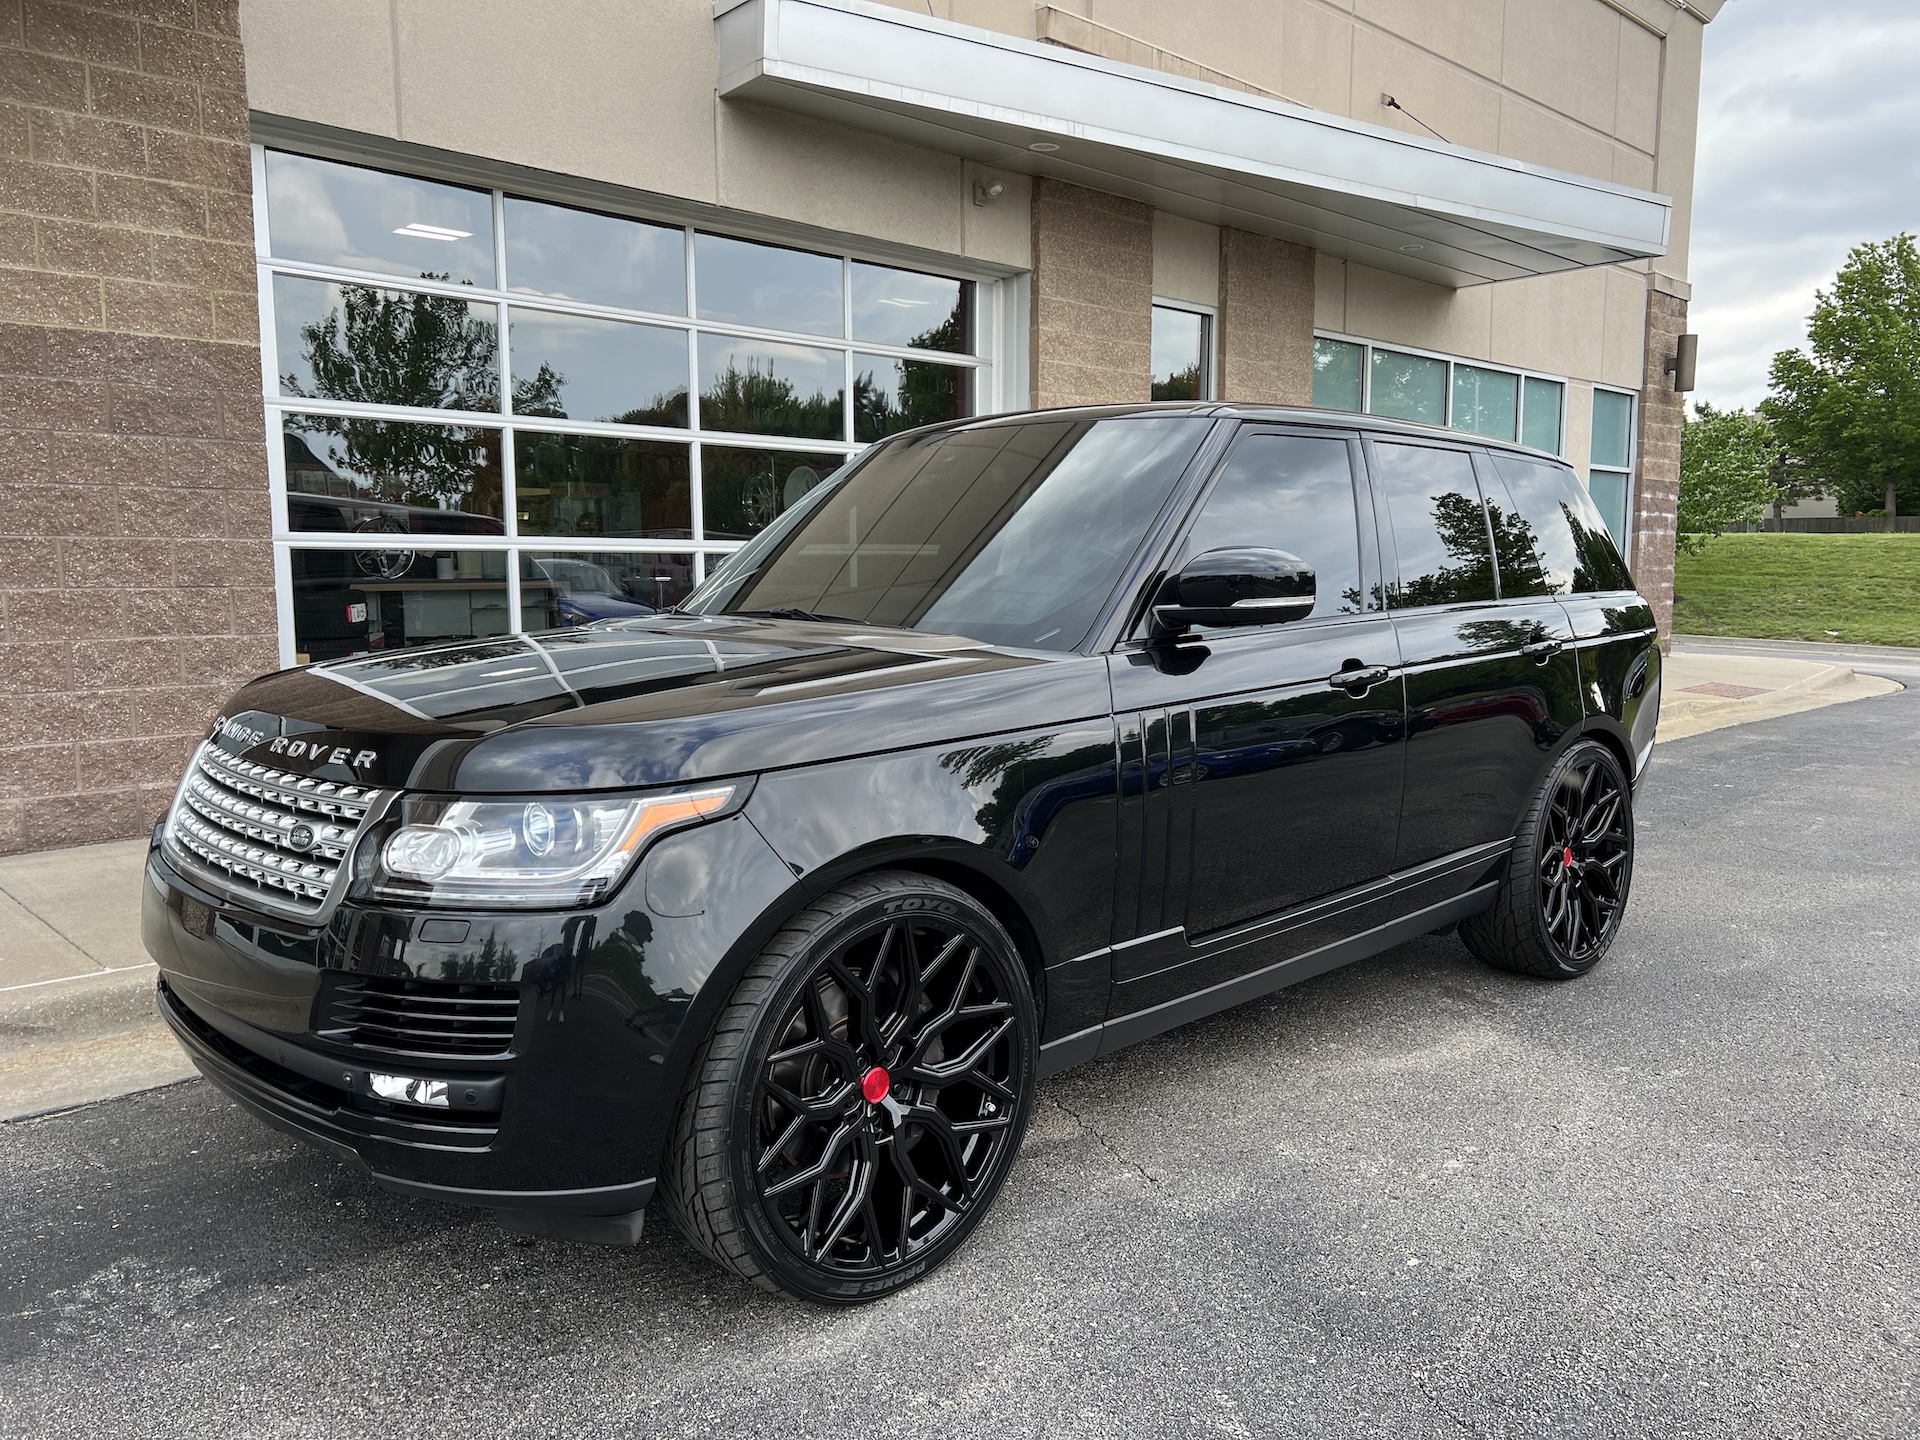  Land Rover Range Rover with Vossen Hybrid Forged HF-2